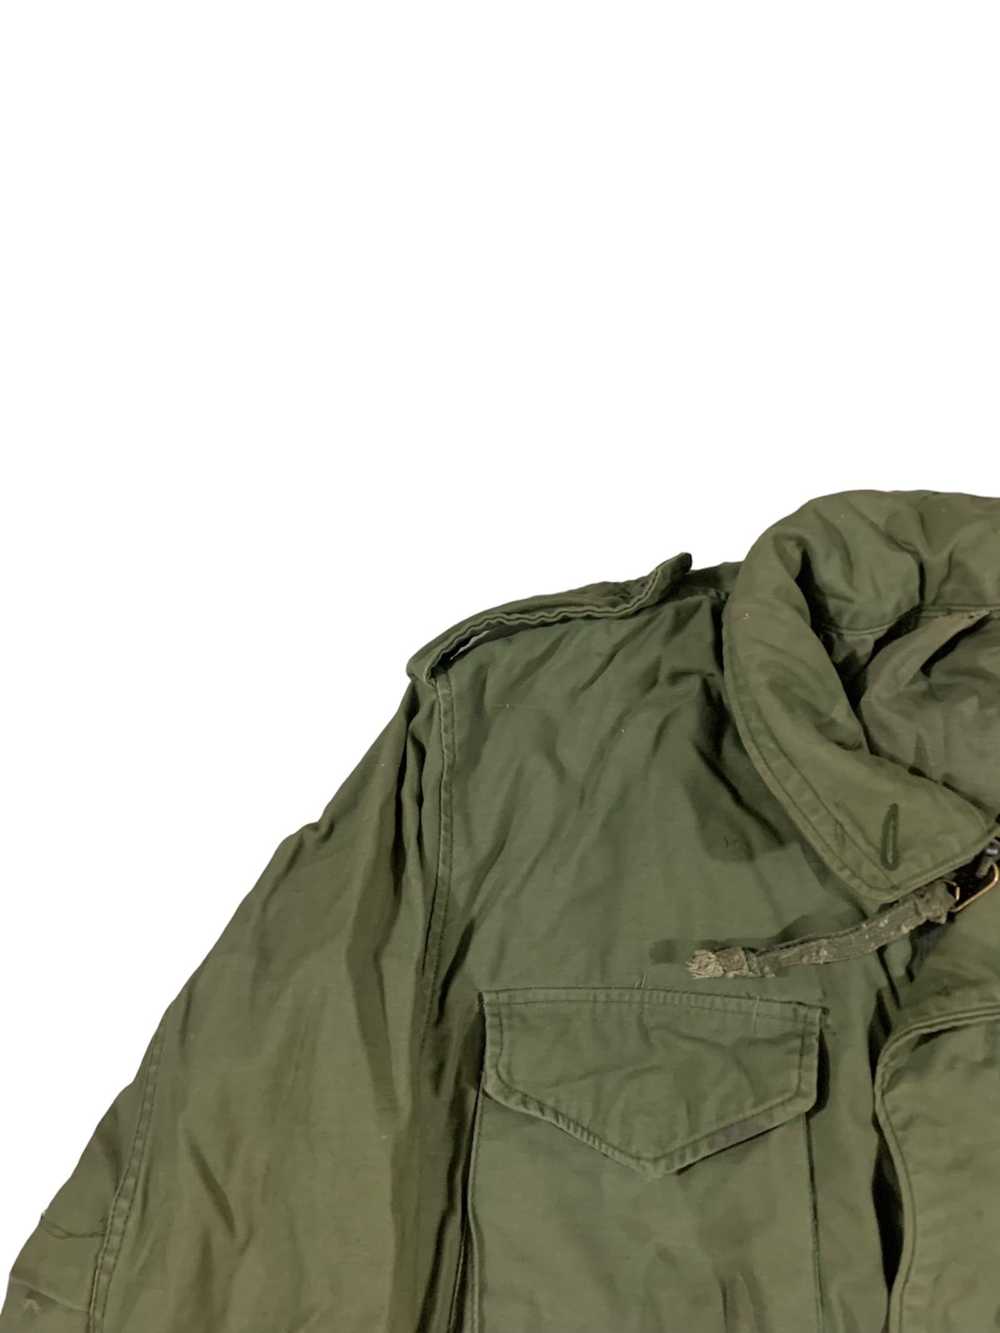 Made In Usa × Military × Vintage Vintage Military… - image 3